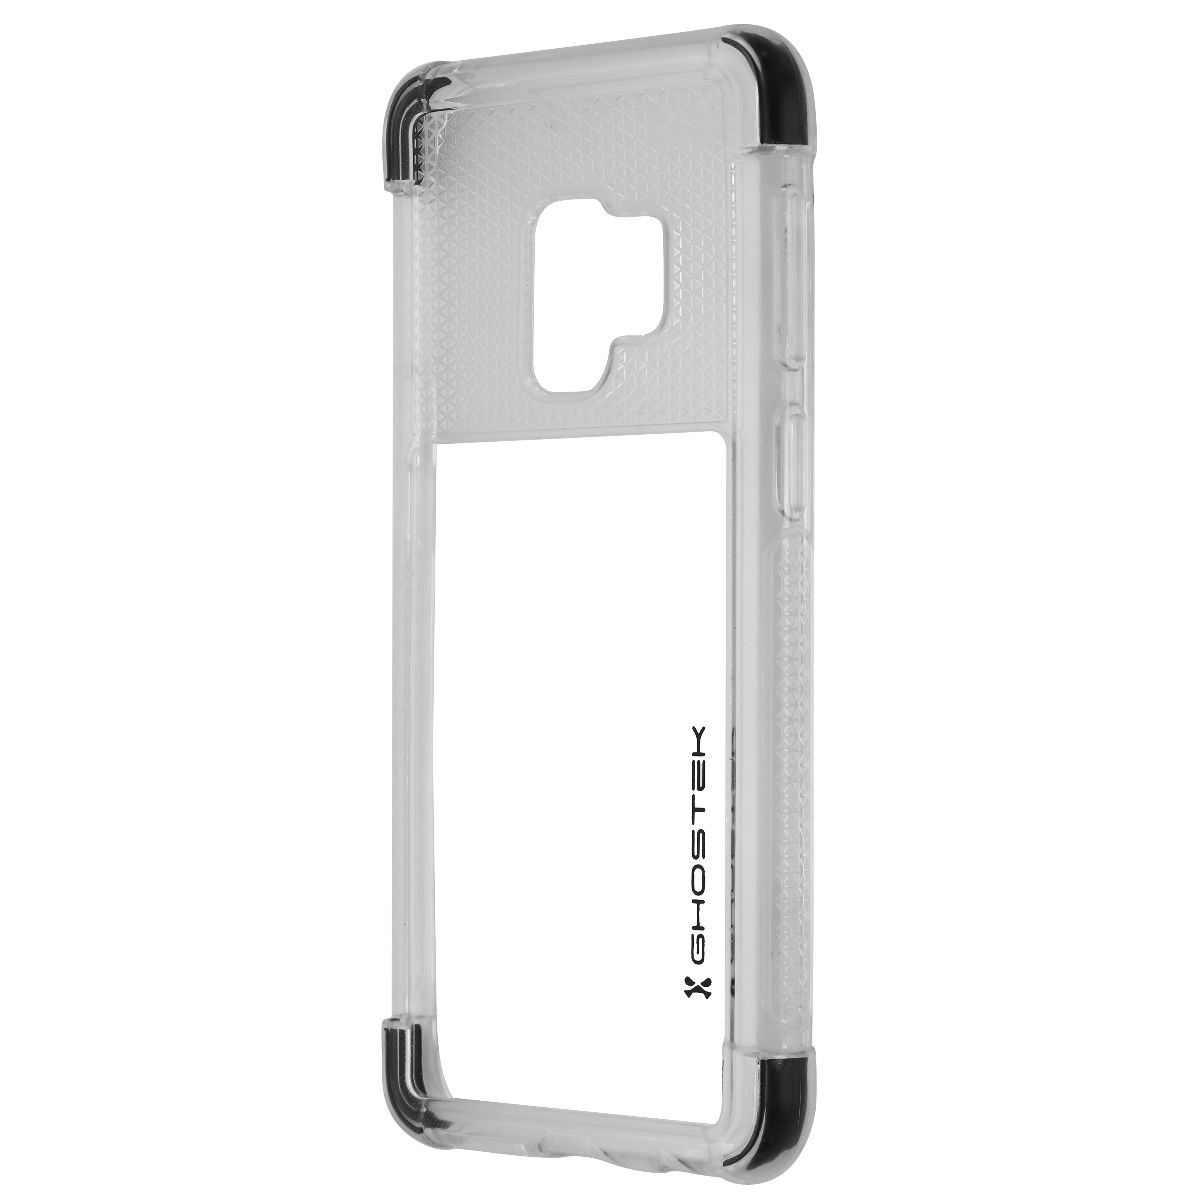 Ghostek Covert2 Series Protective Phone Case For Samsung Galaxy S9 - Clear (Refurbished)